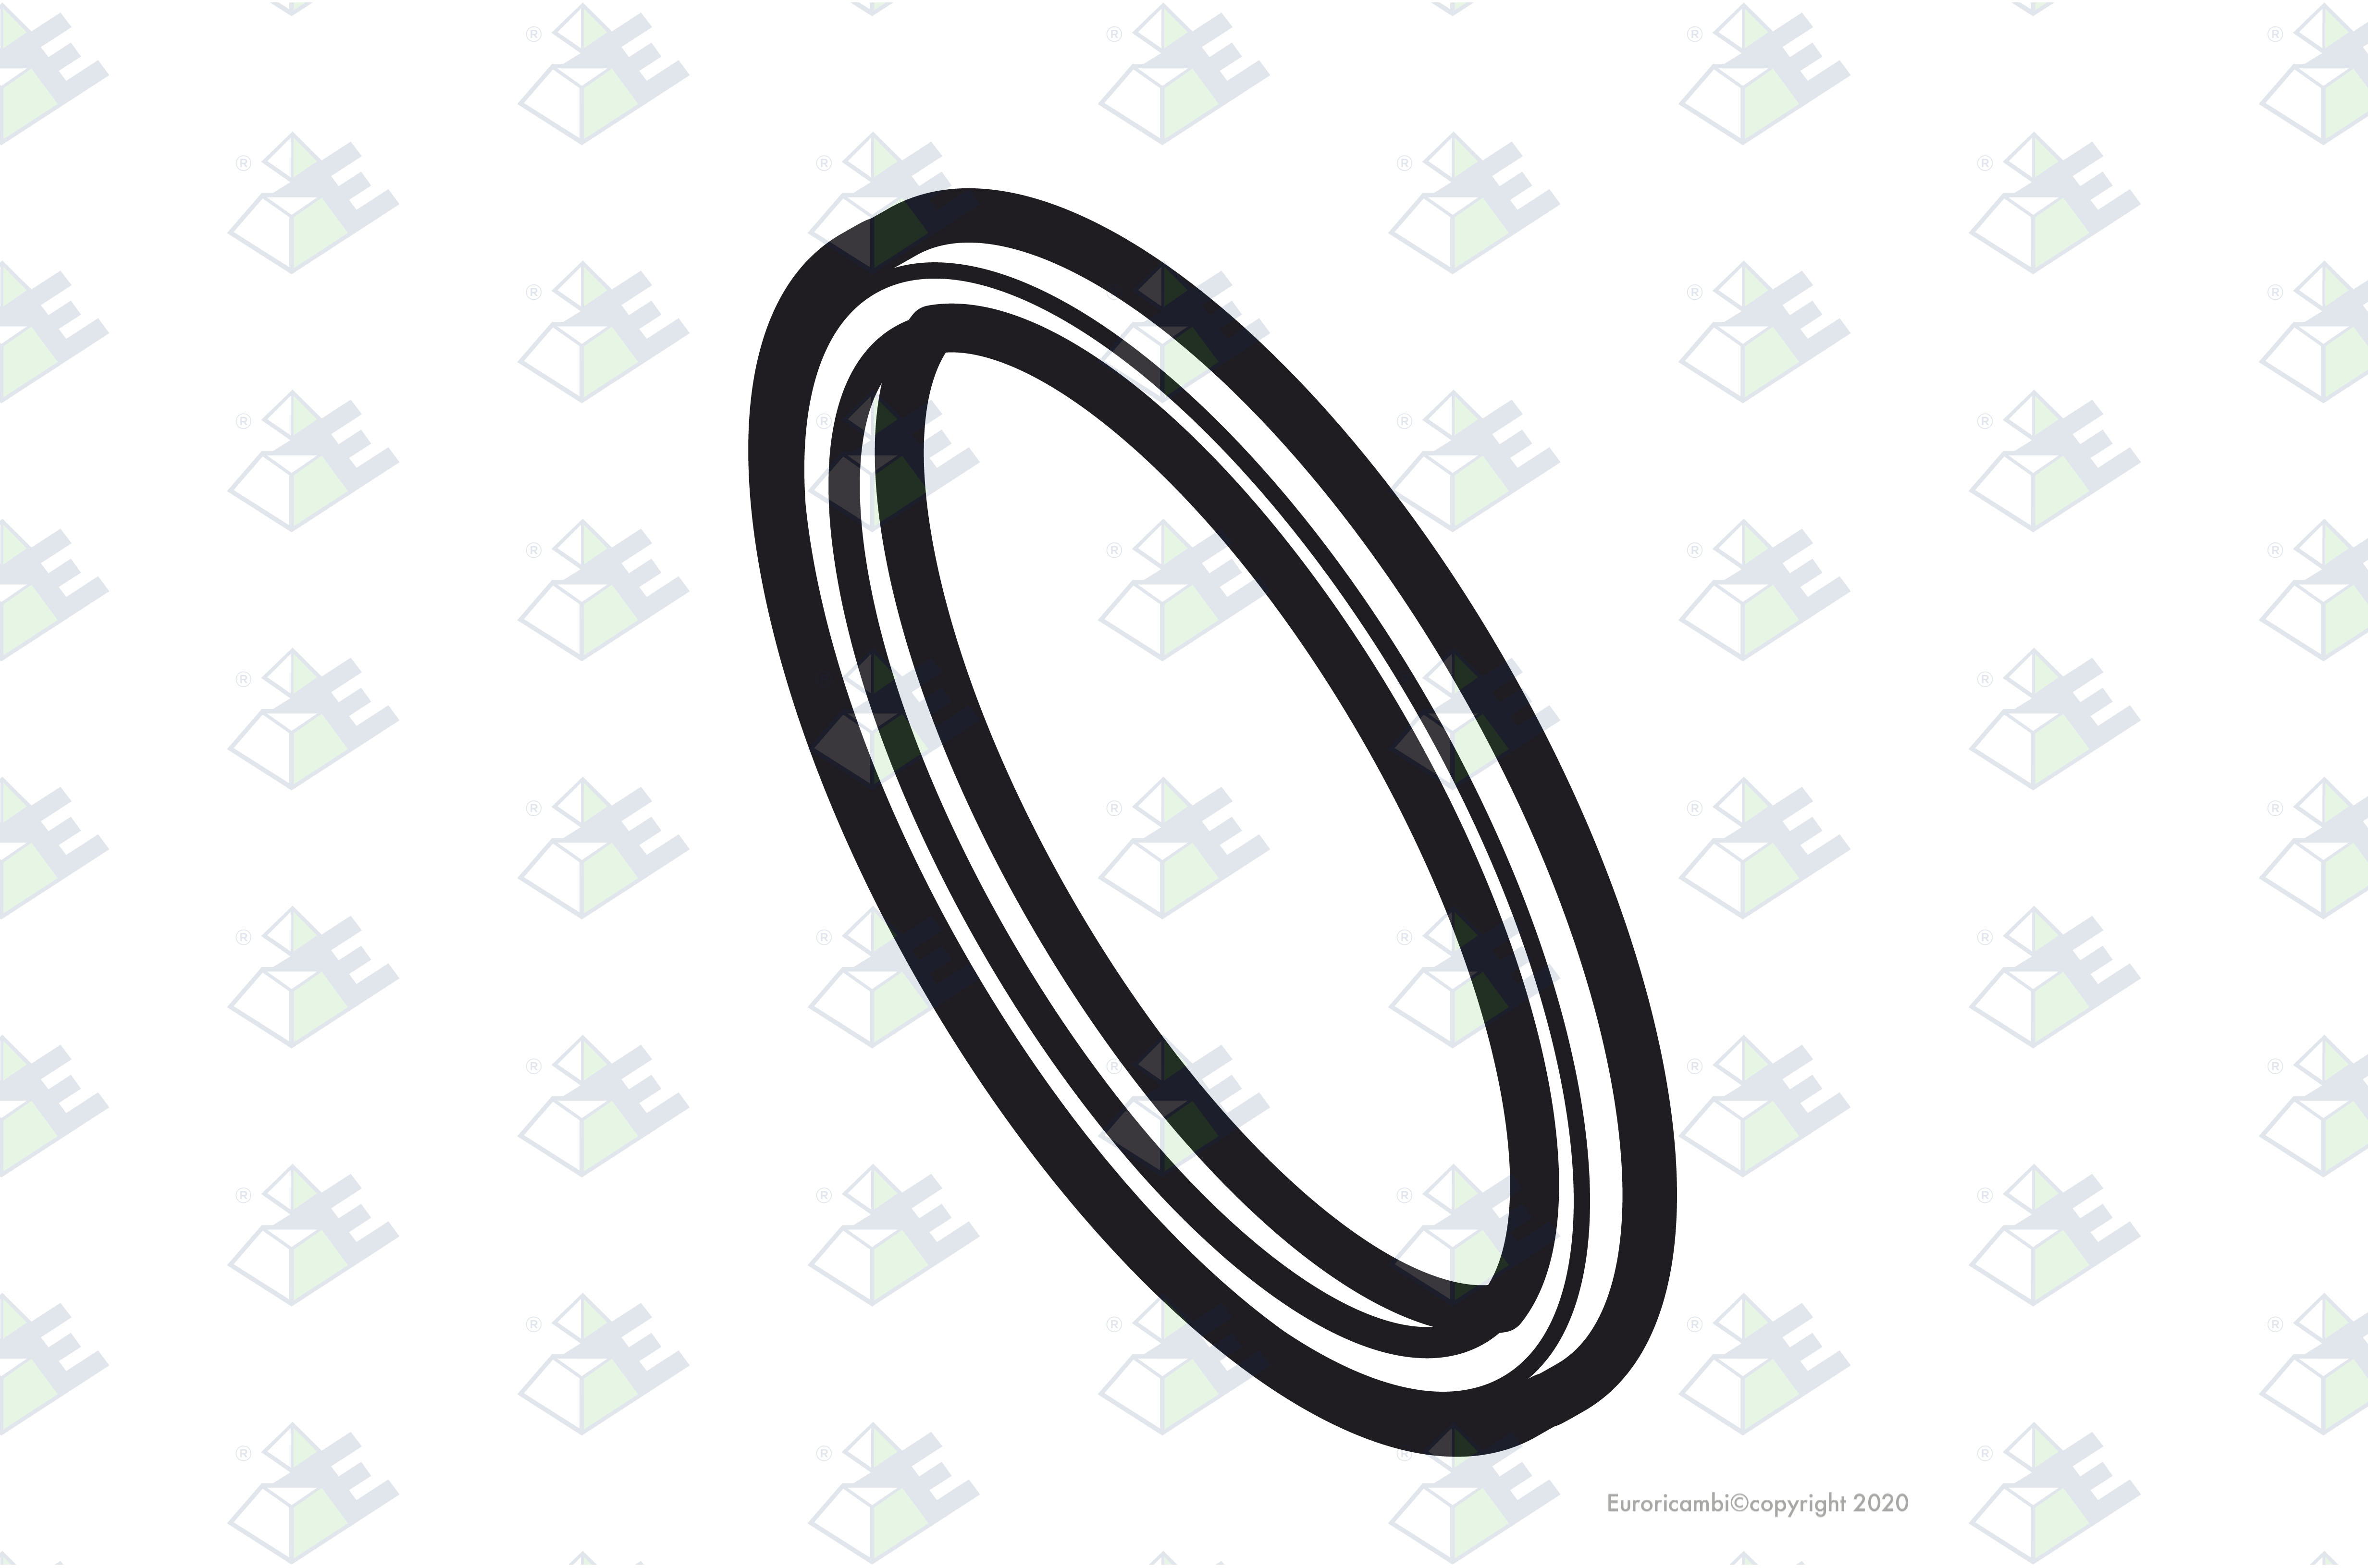 SHIM 0,75 MM suitable to S C A N I A 312155